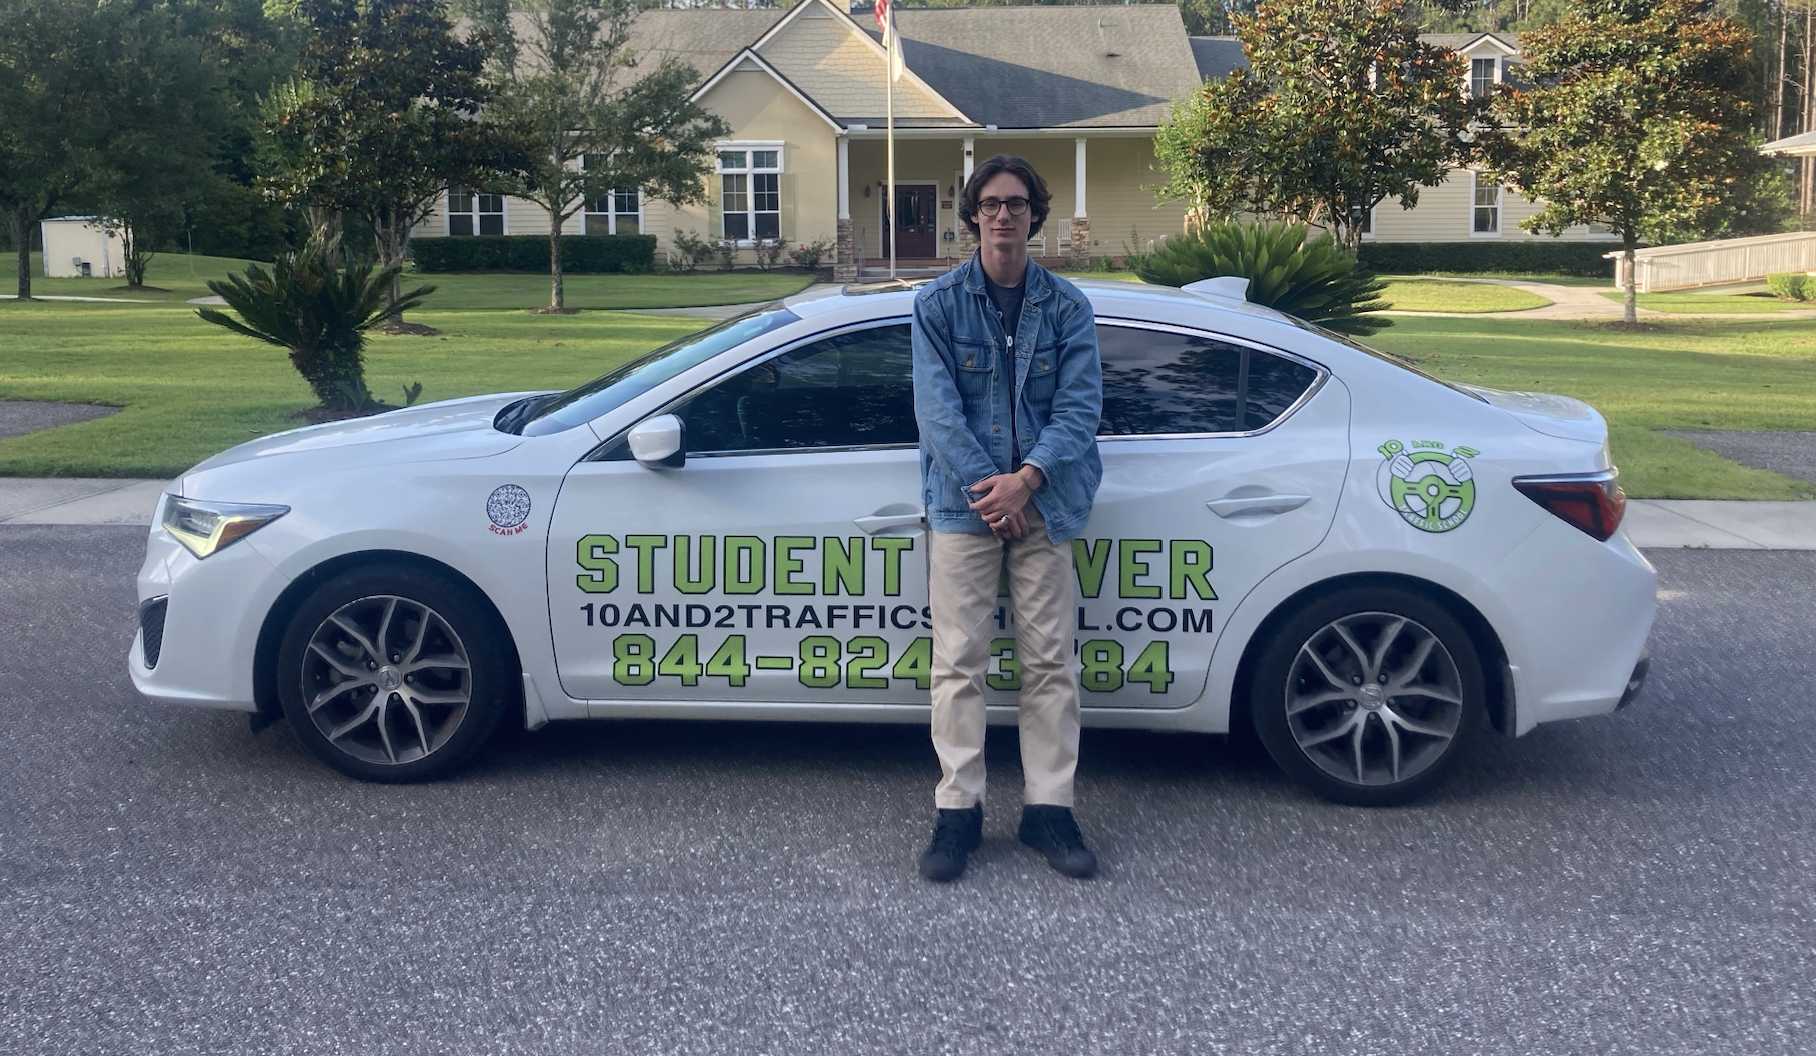 Florida's Highest Rated Driving School - 10 and 2 Traffic School